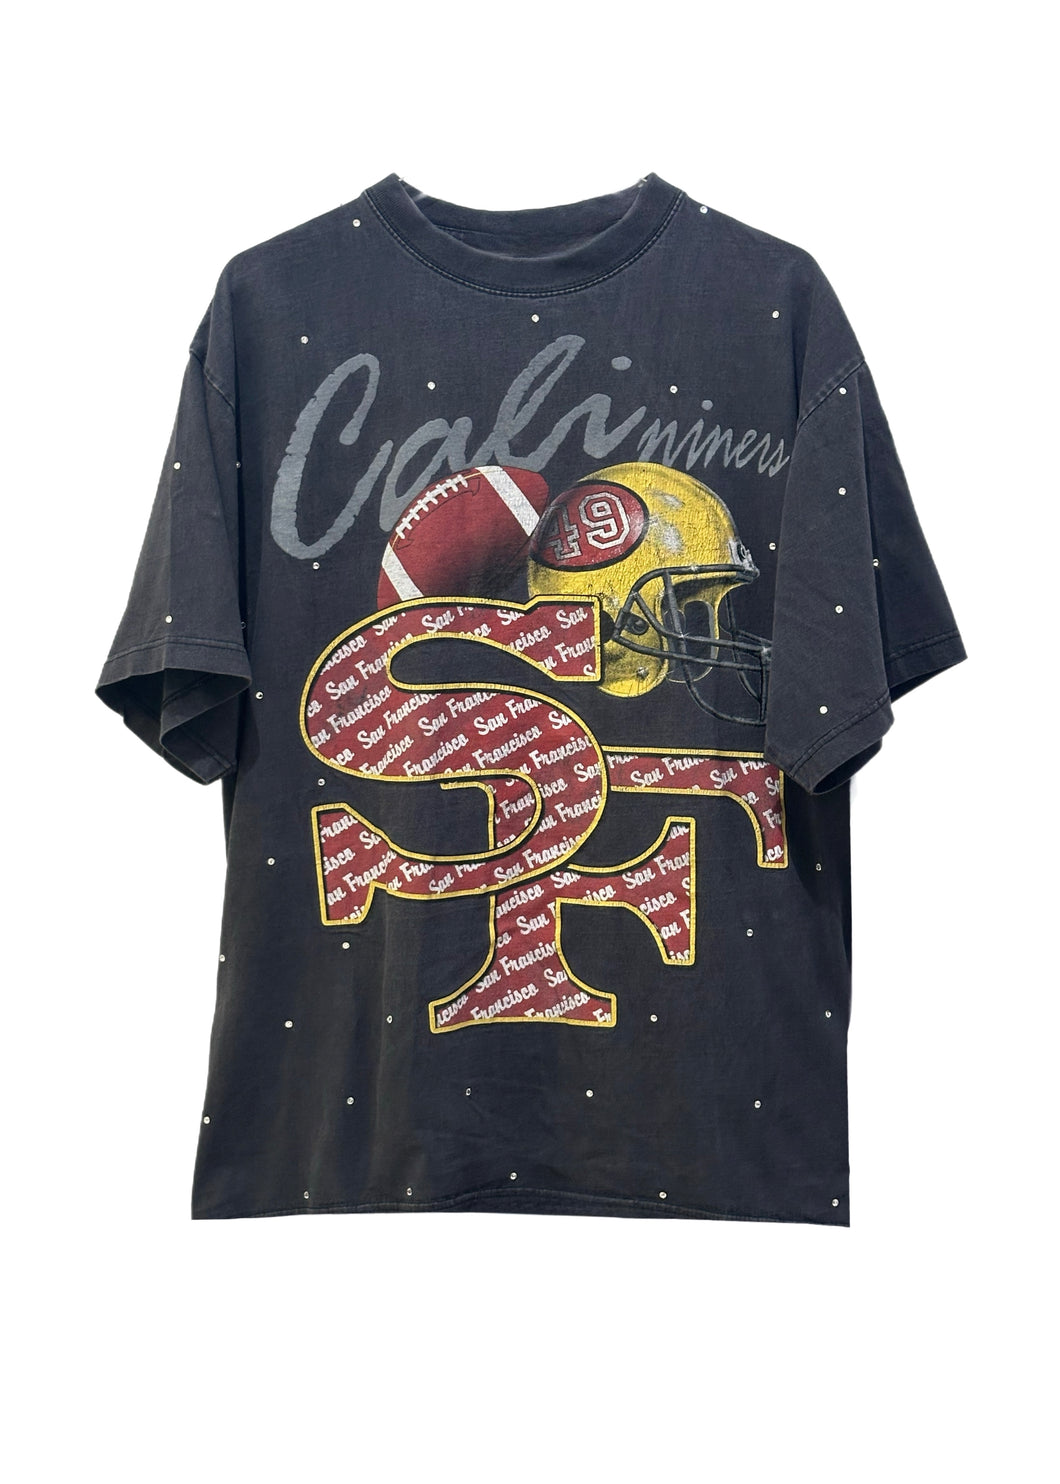 San Francisco 49ers, Football “Rare Find” One of a KIND Vintage Tee with Over All Crystal Design